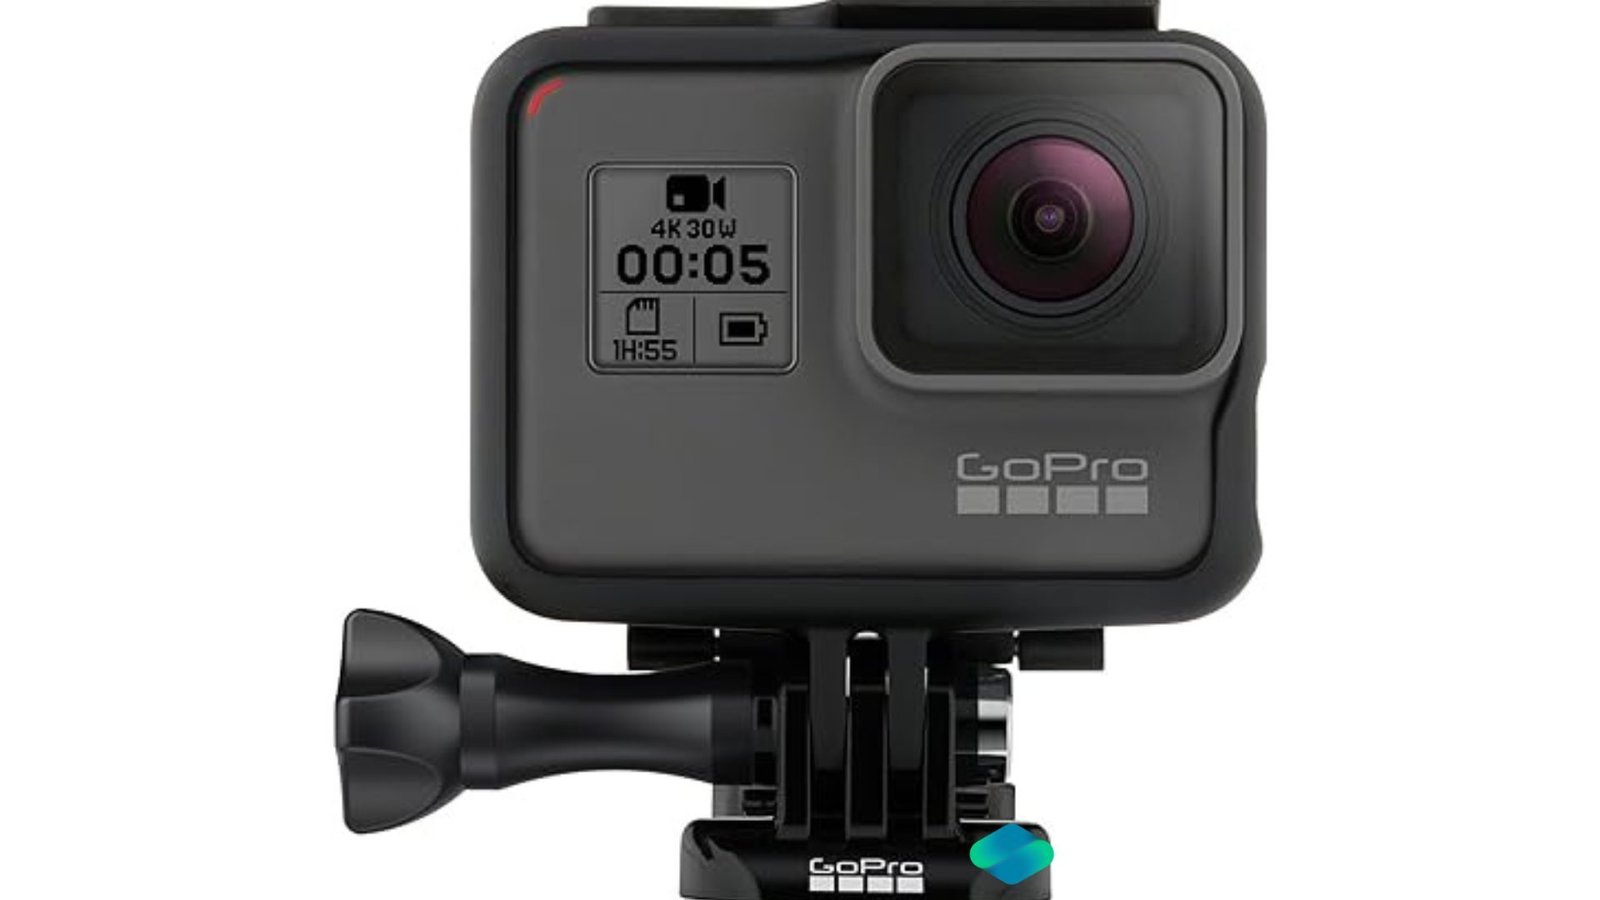 Rent GoPro Hero 5 Camera With All Accessories in Delhi NCR, Camera accessories, Camera lenses for rent, in Delhi Gurgaon Noida, hire Shooting equipment, Lighting equipment rental, Film gear rental for Video production, camera rental company in Delhi, film equipment rental company